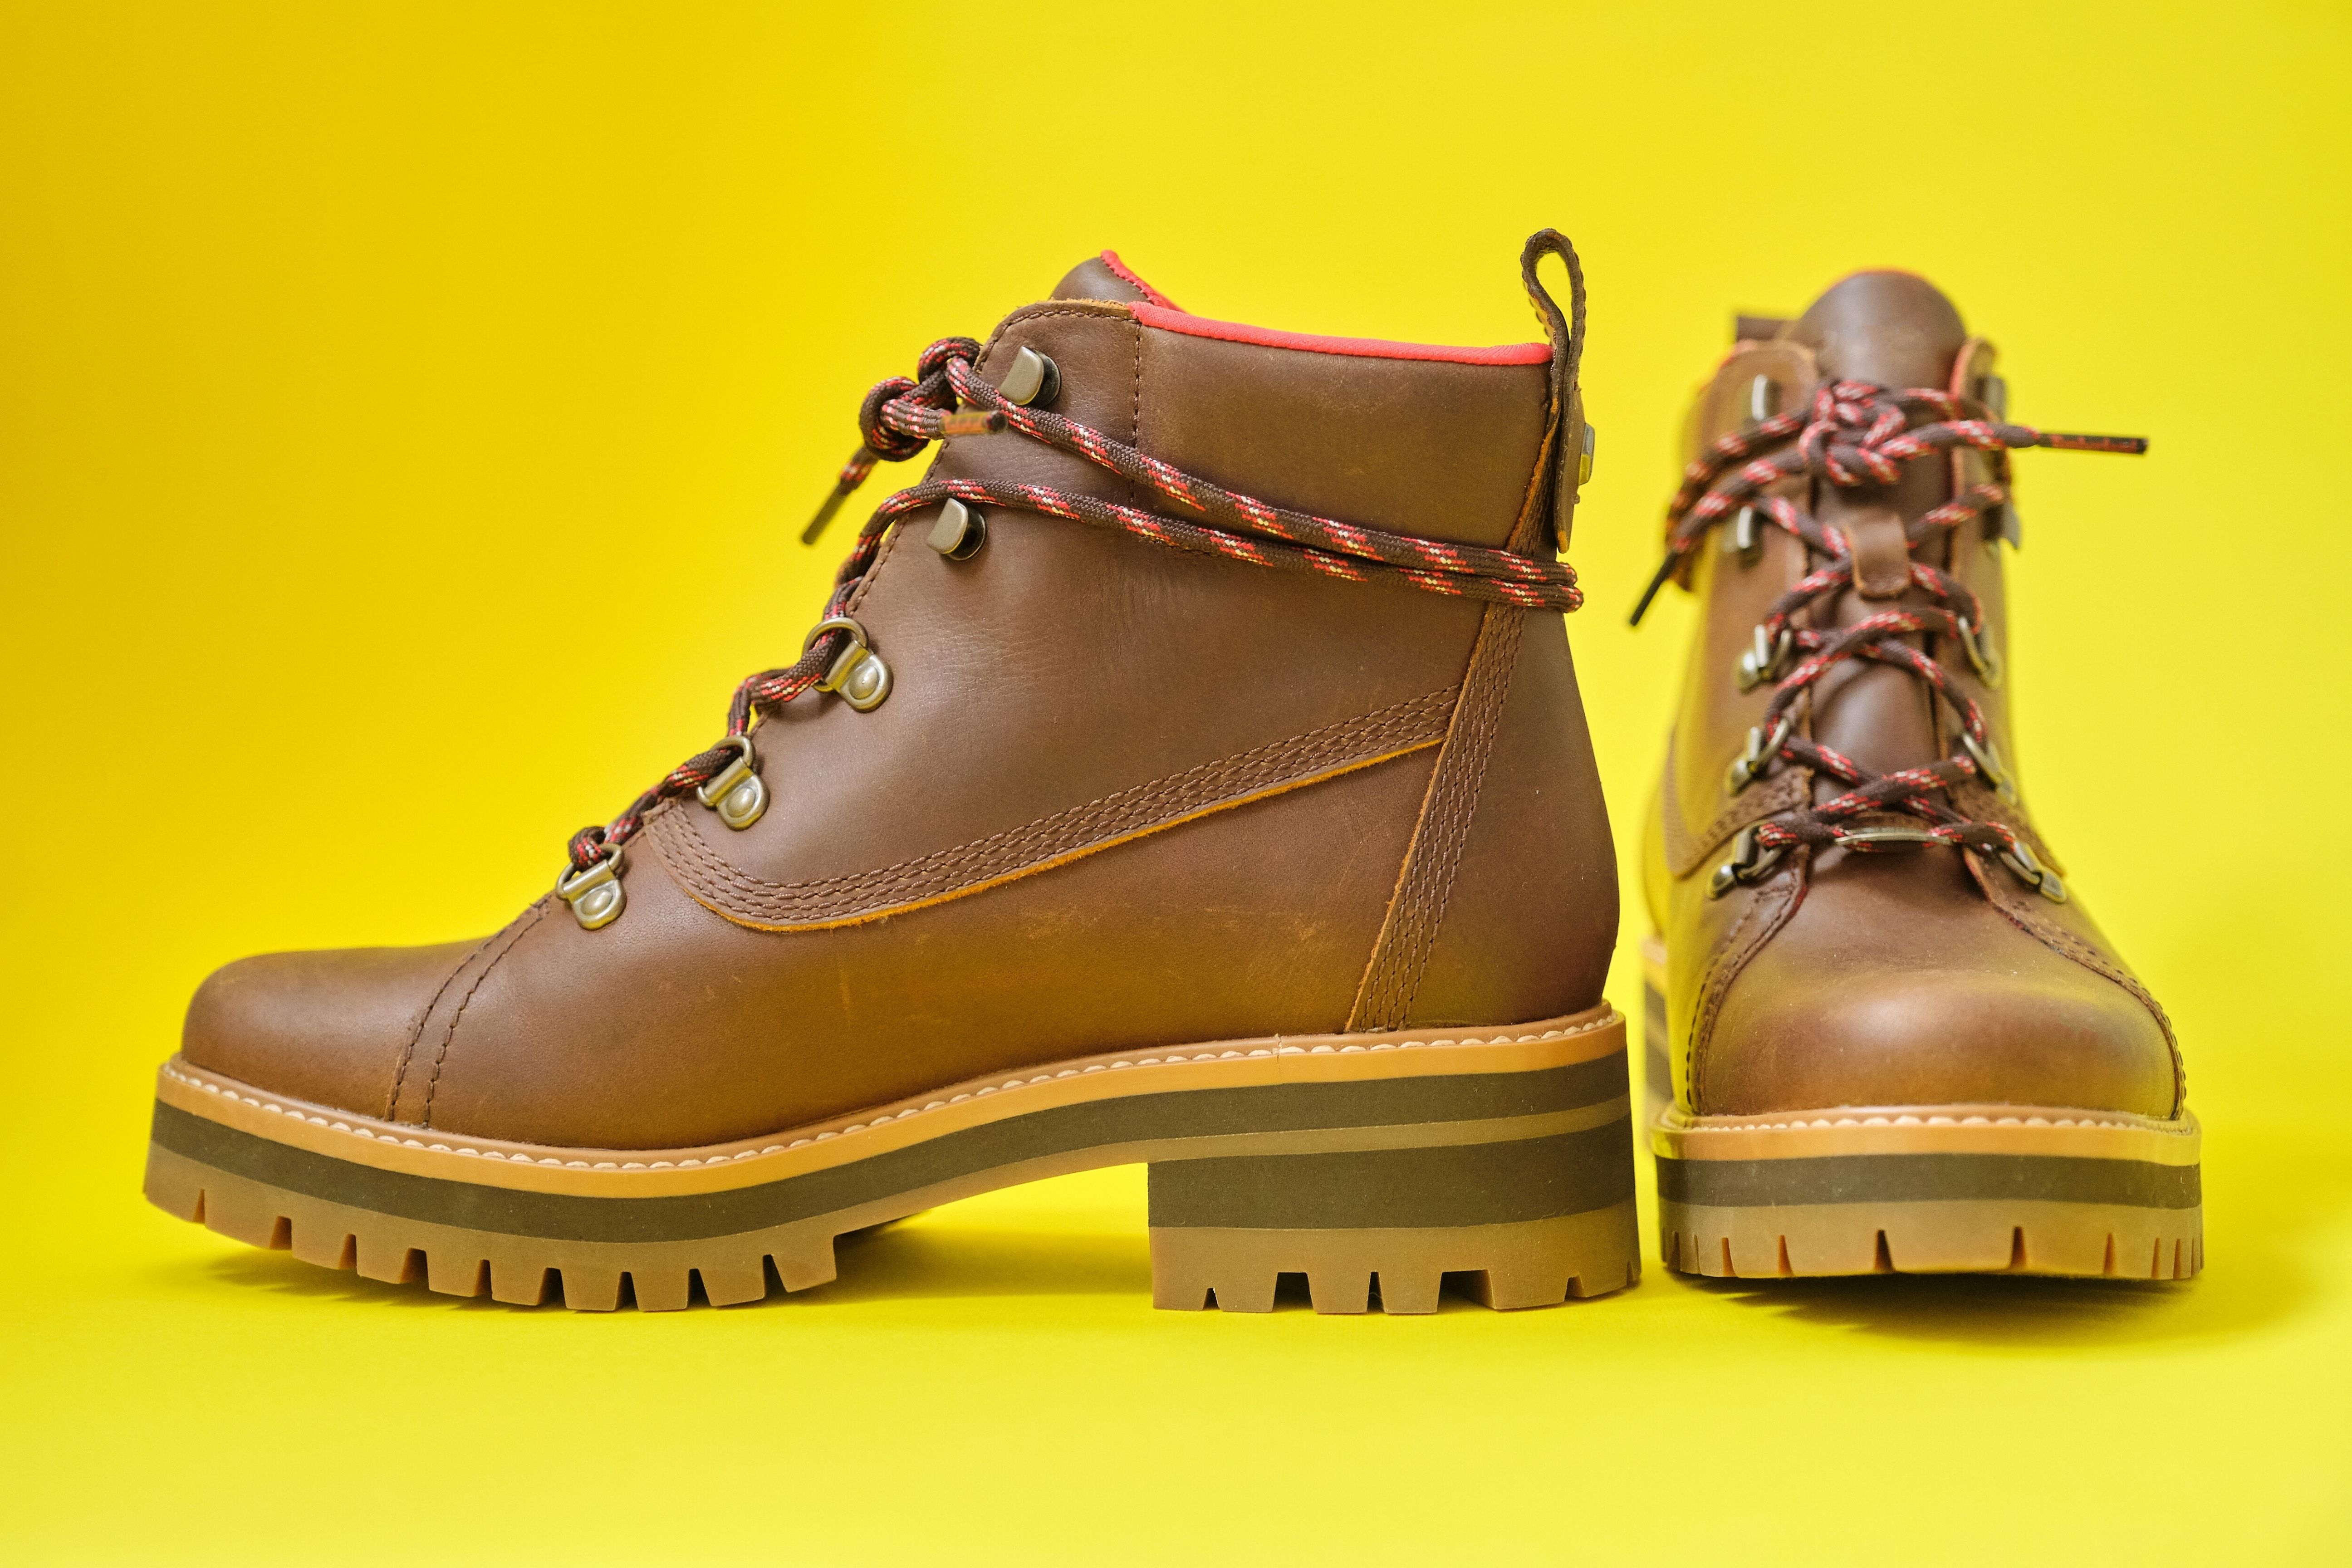 How to Waterproof Leather Boots For Winter